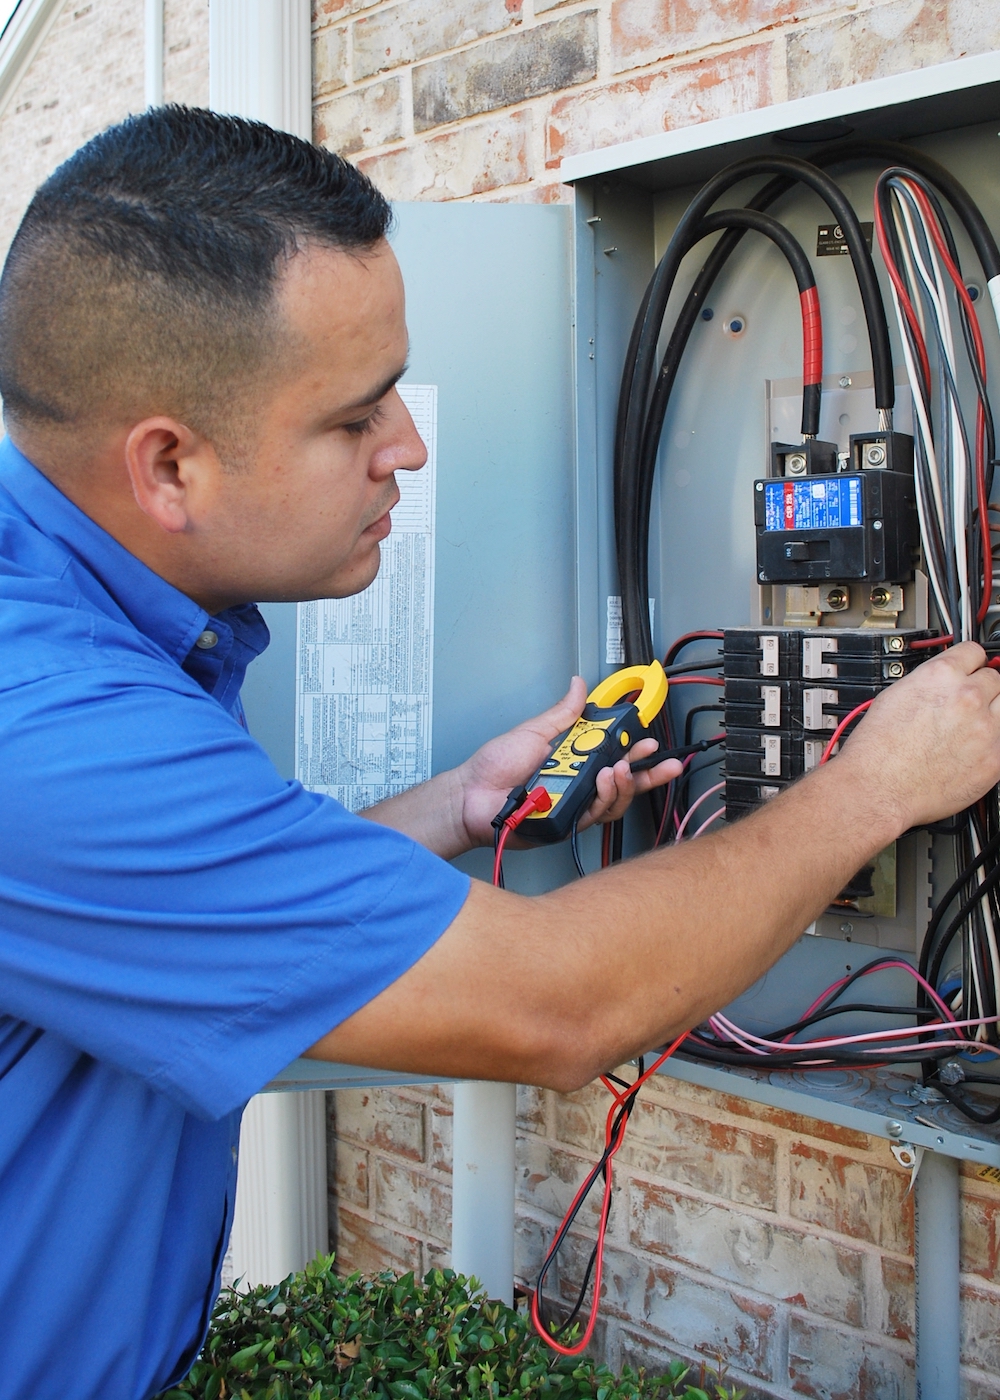 An ABC electrician working on an electrical panel